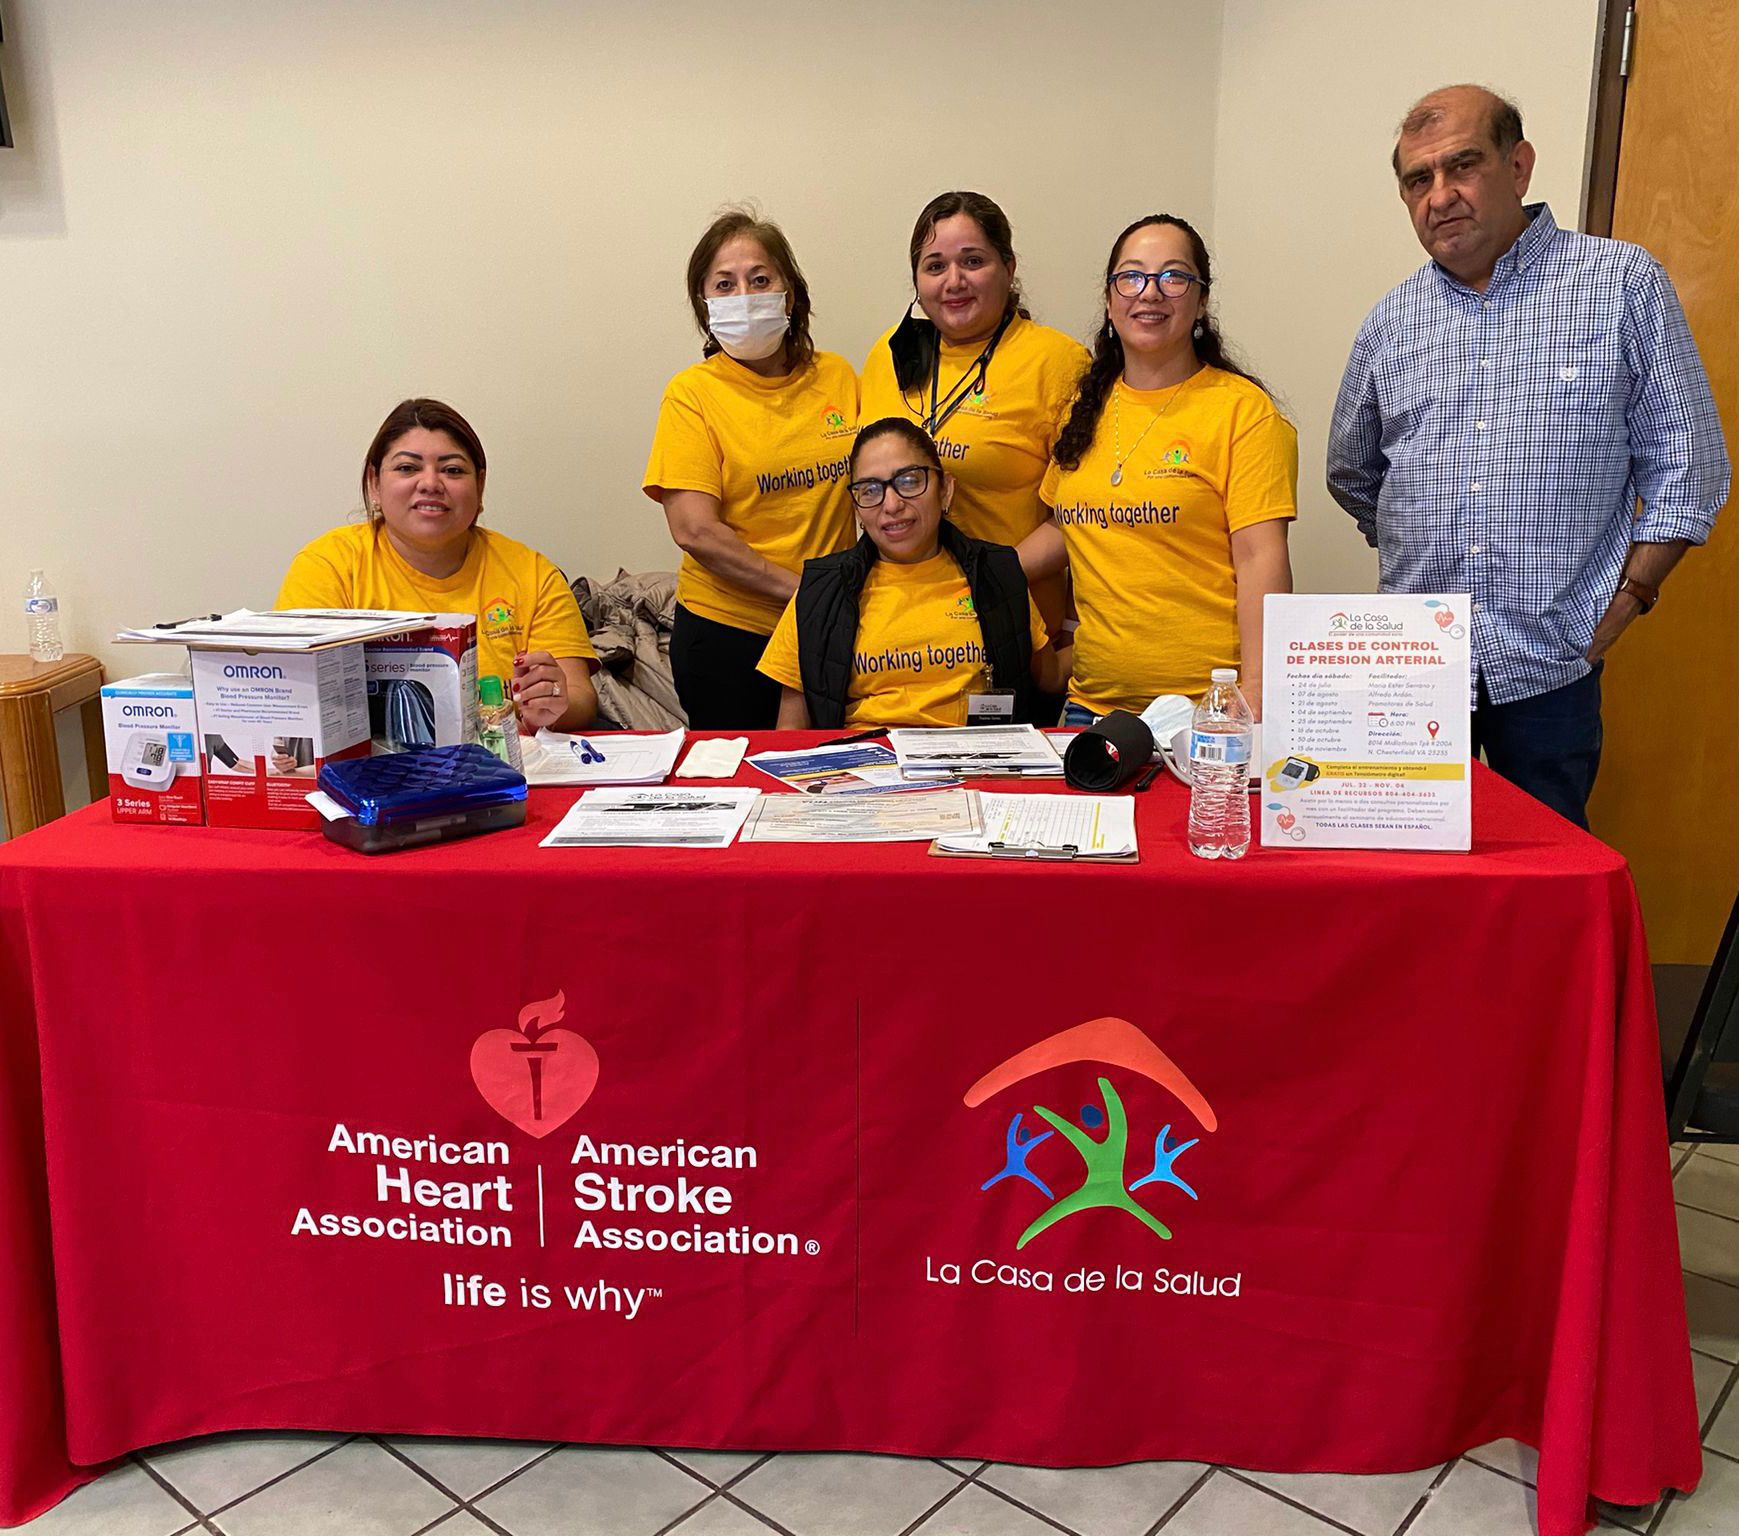 A group of volunteers smiles and poses together at a table. The table cloth notes they are there with the American Heart Association, American Stroke Association, and la Casa de la Salud